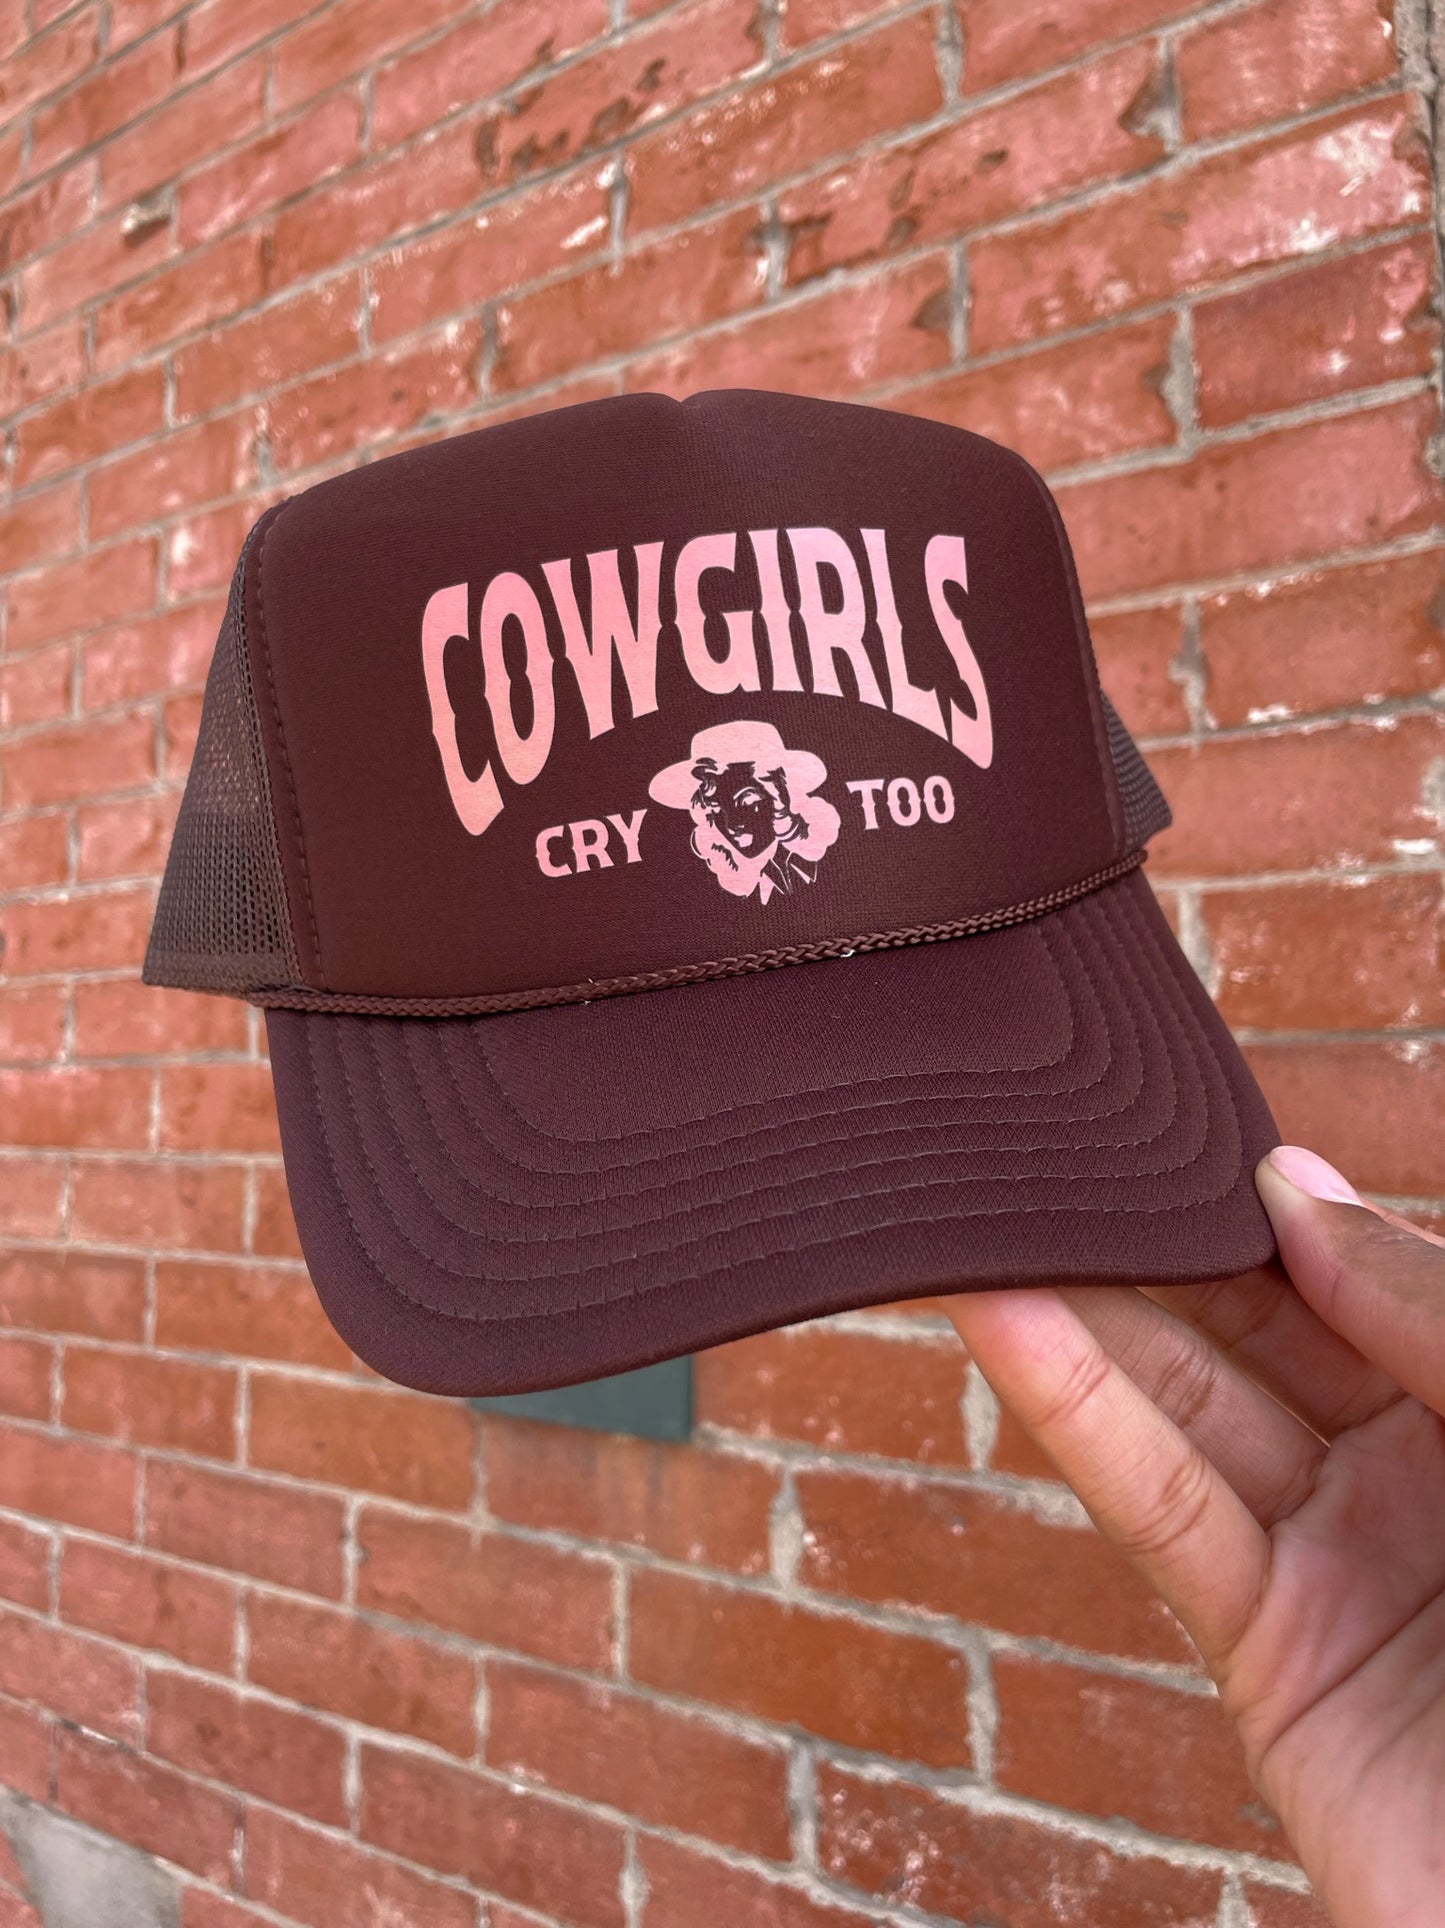 "Cowgirls Cry Too" Trucker Hat